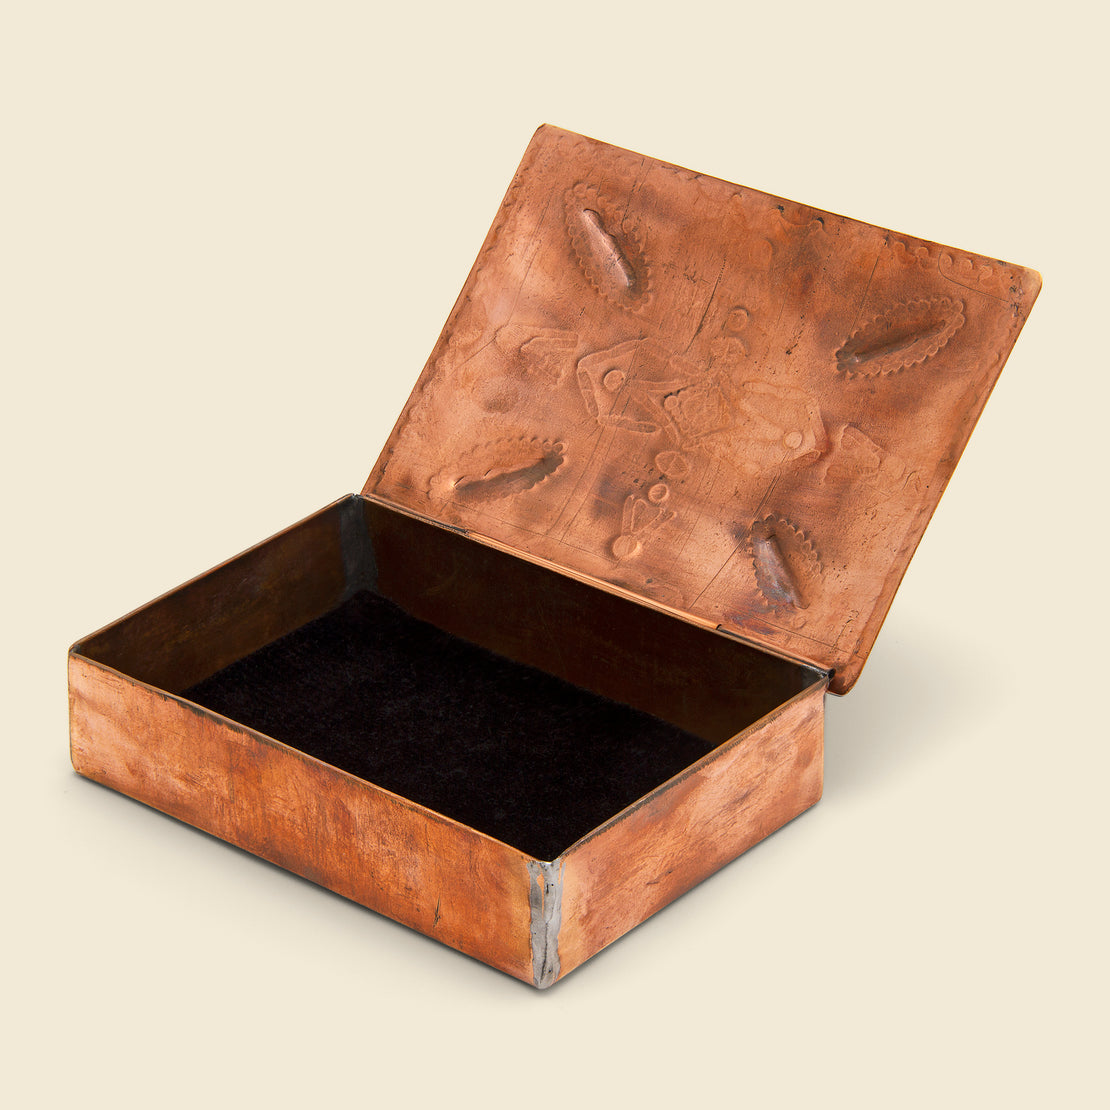 Vintage Style Box - Copper - J Alexander - STAG Provisions - Home - Bar & Entertaining - Smoke Shop